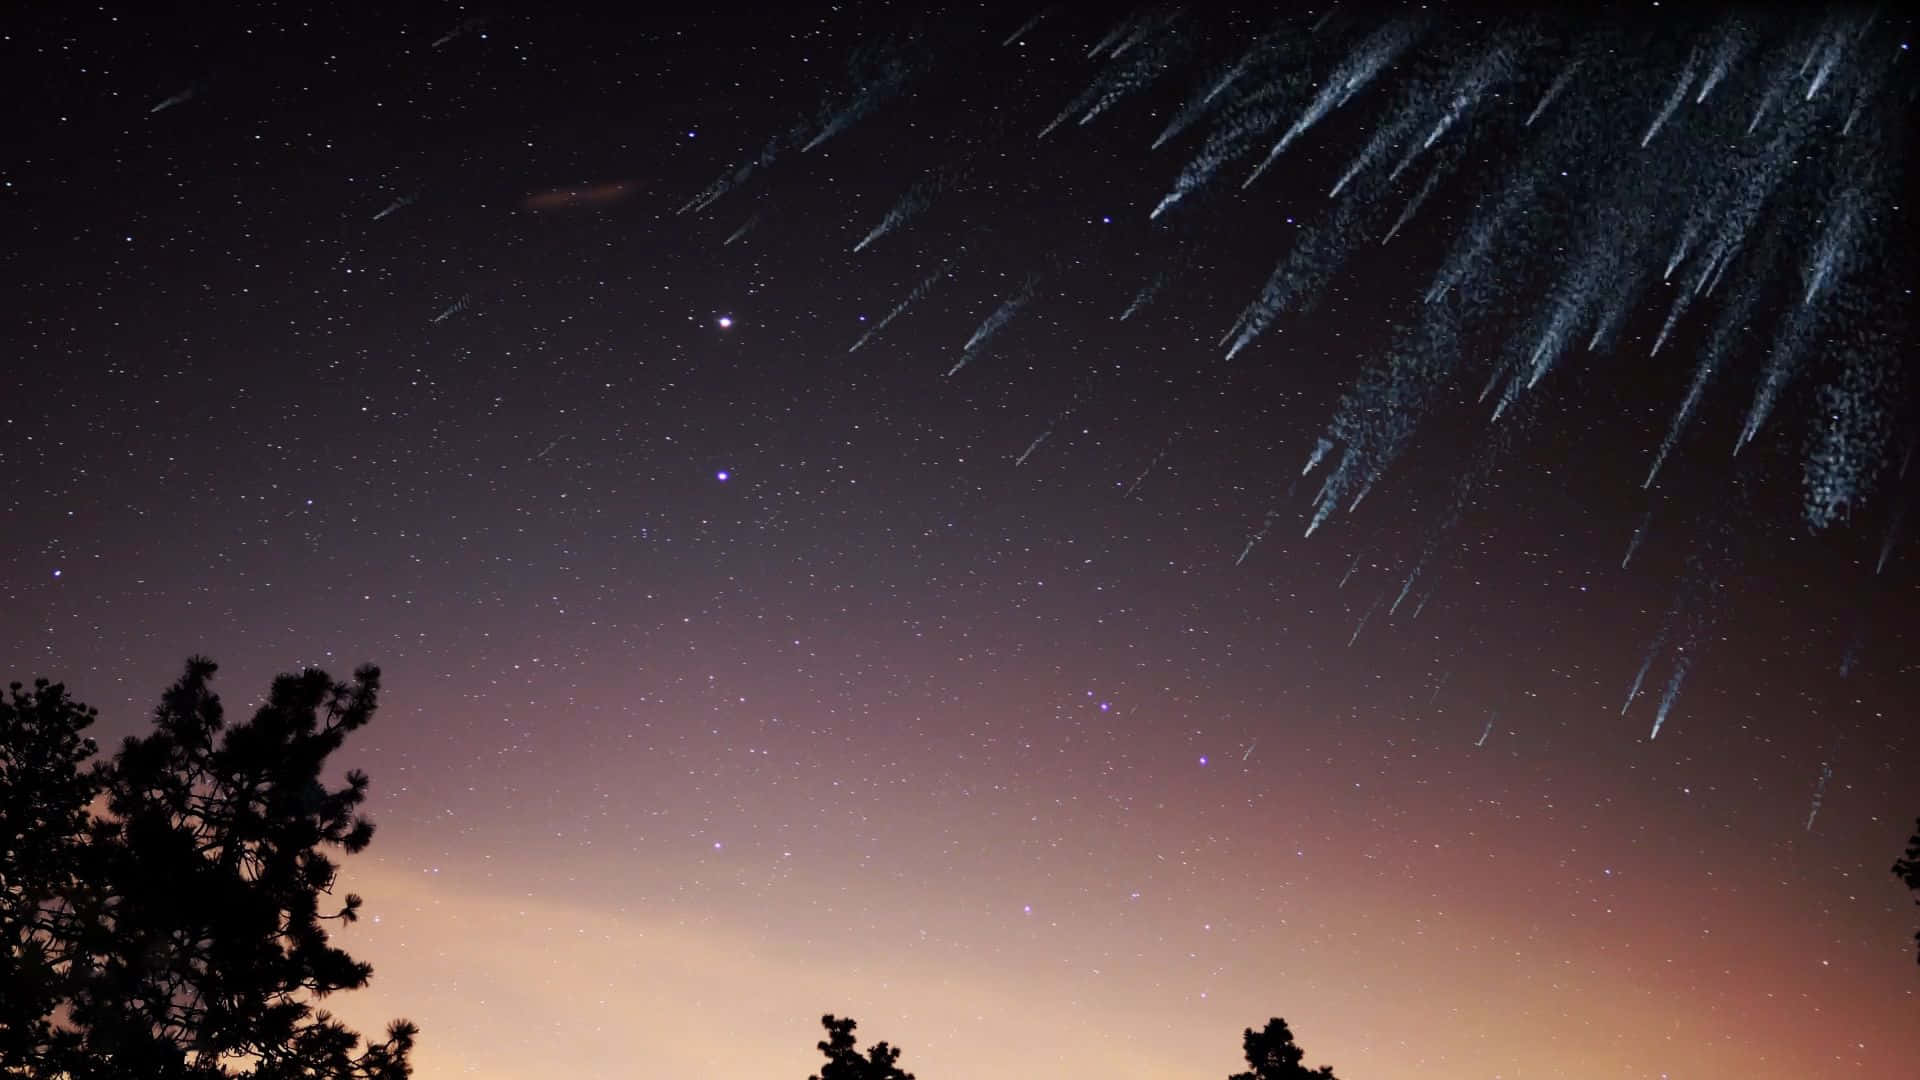 Get mesmerized by the trails of a blazing meteor